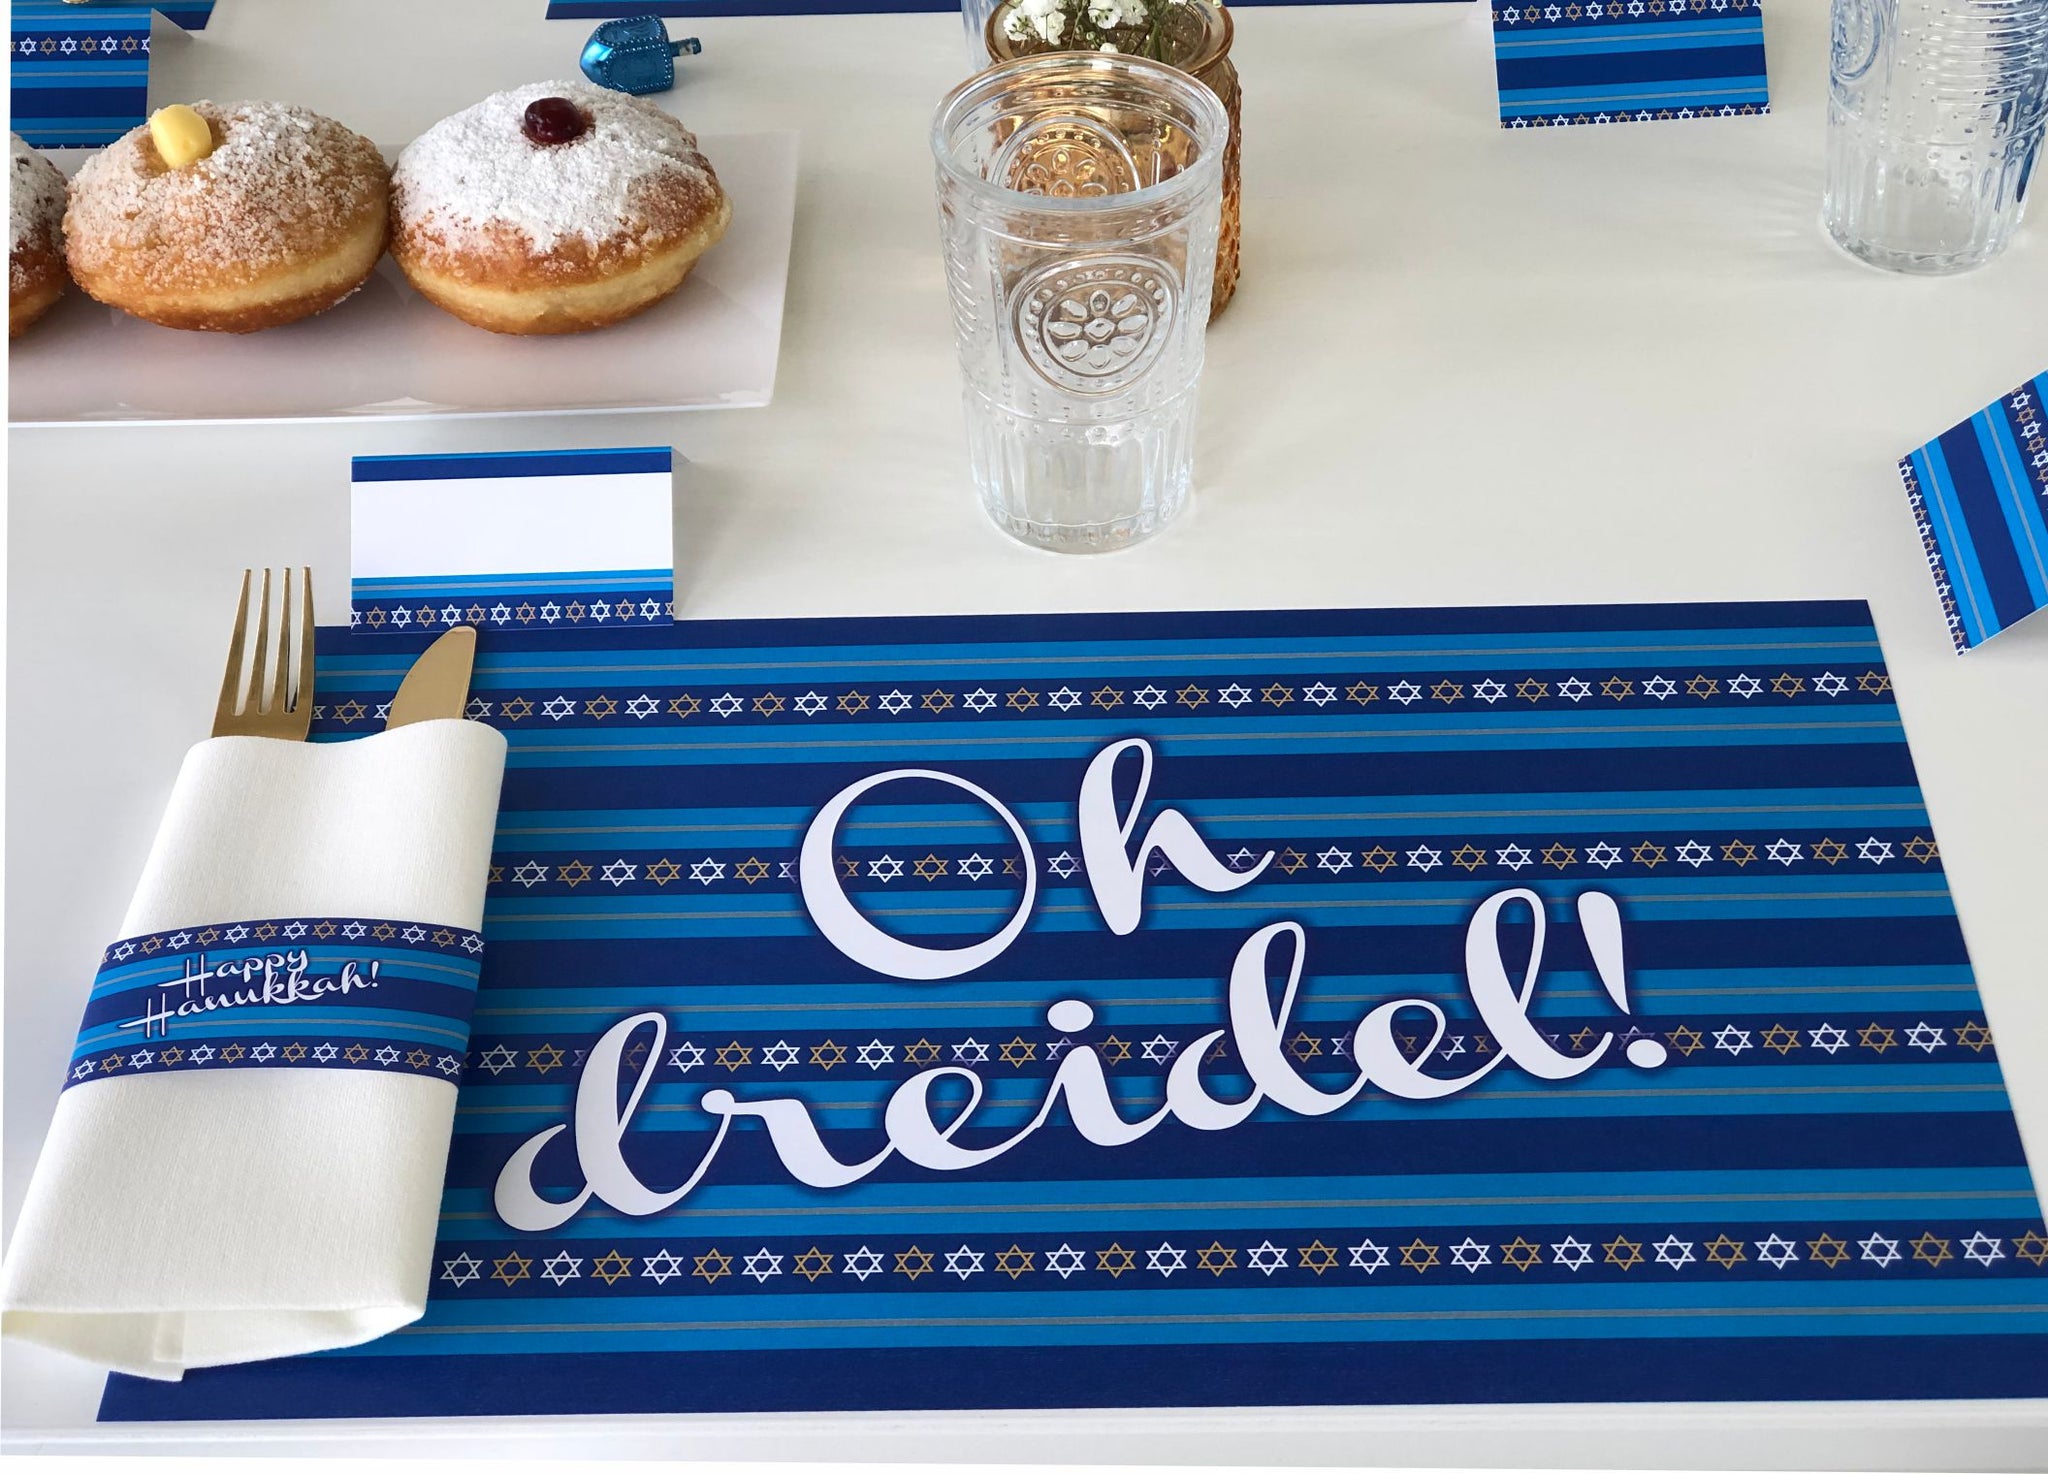 Hanukkah Set of Placemats, Napkin rings and place cards